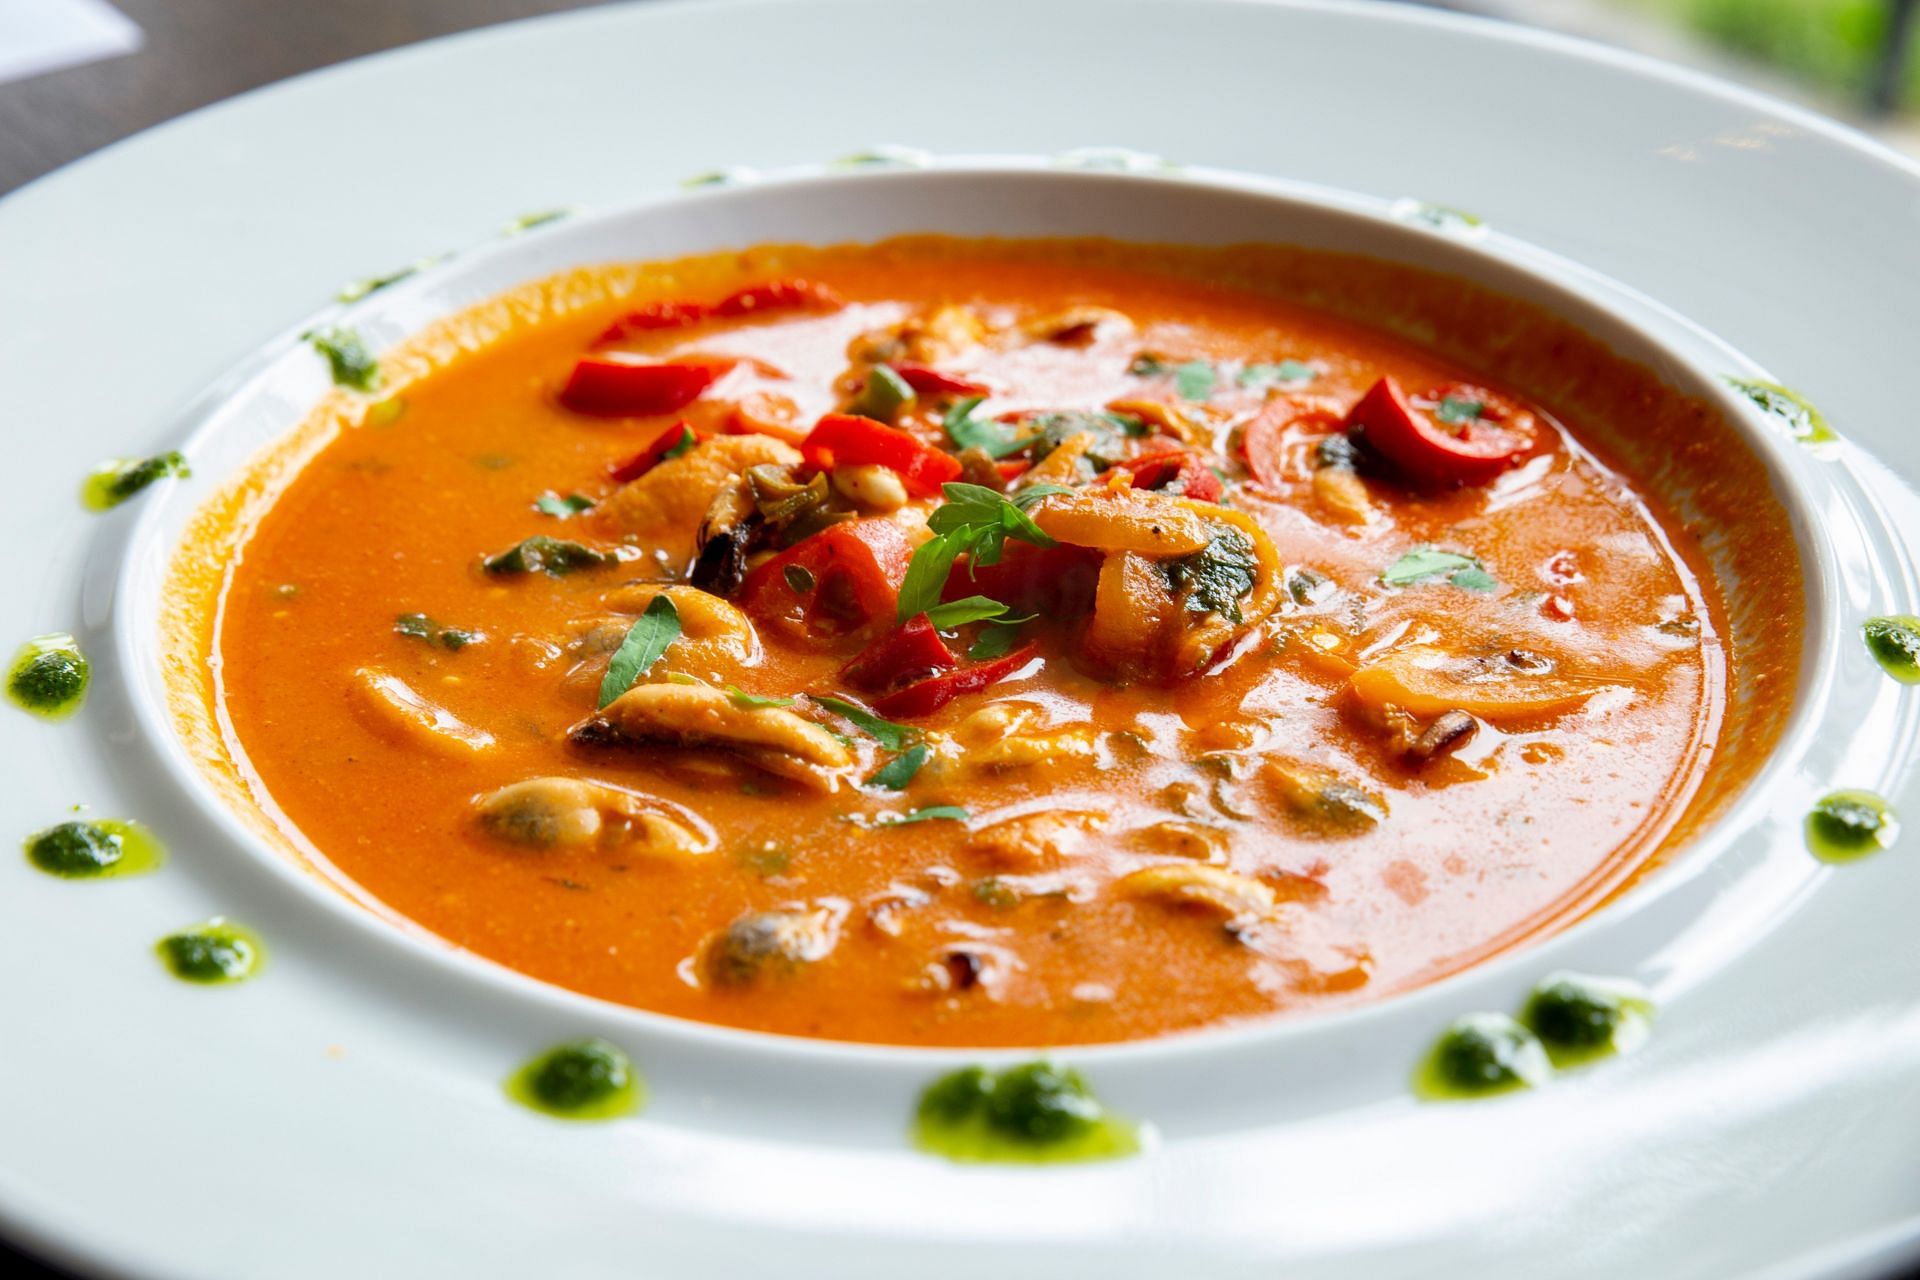 A bowl of steaming hot tomato soup is one of the best winter meals (Image via Pexels/Votsis Panagiotis)